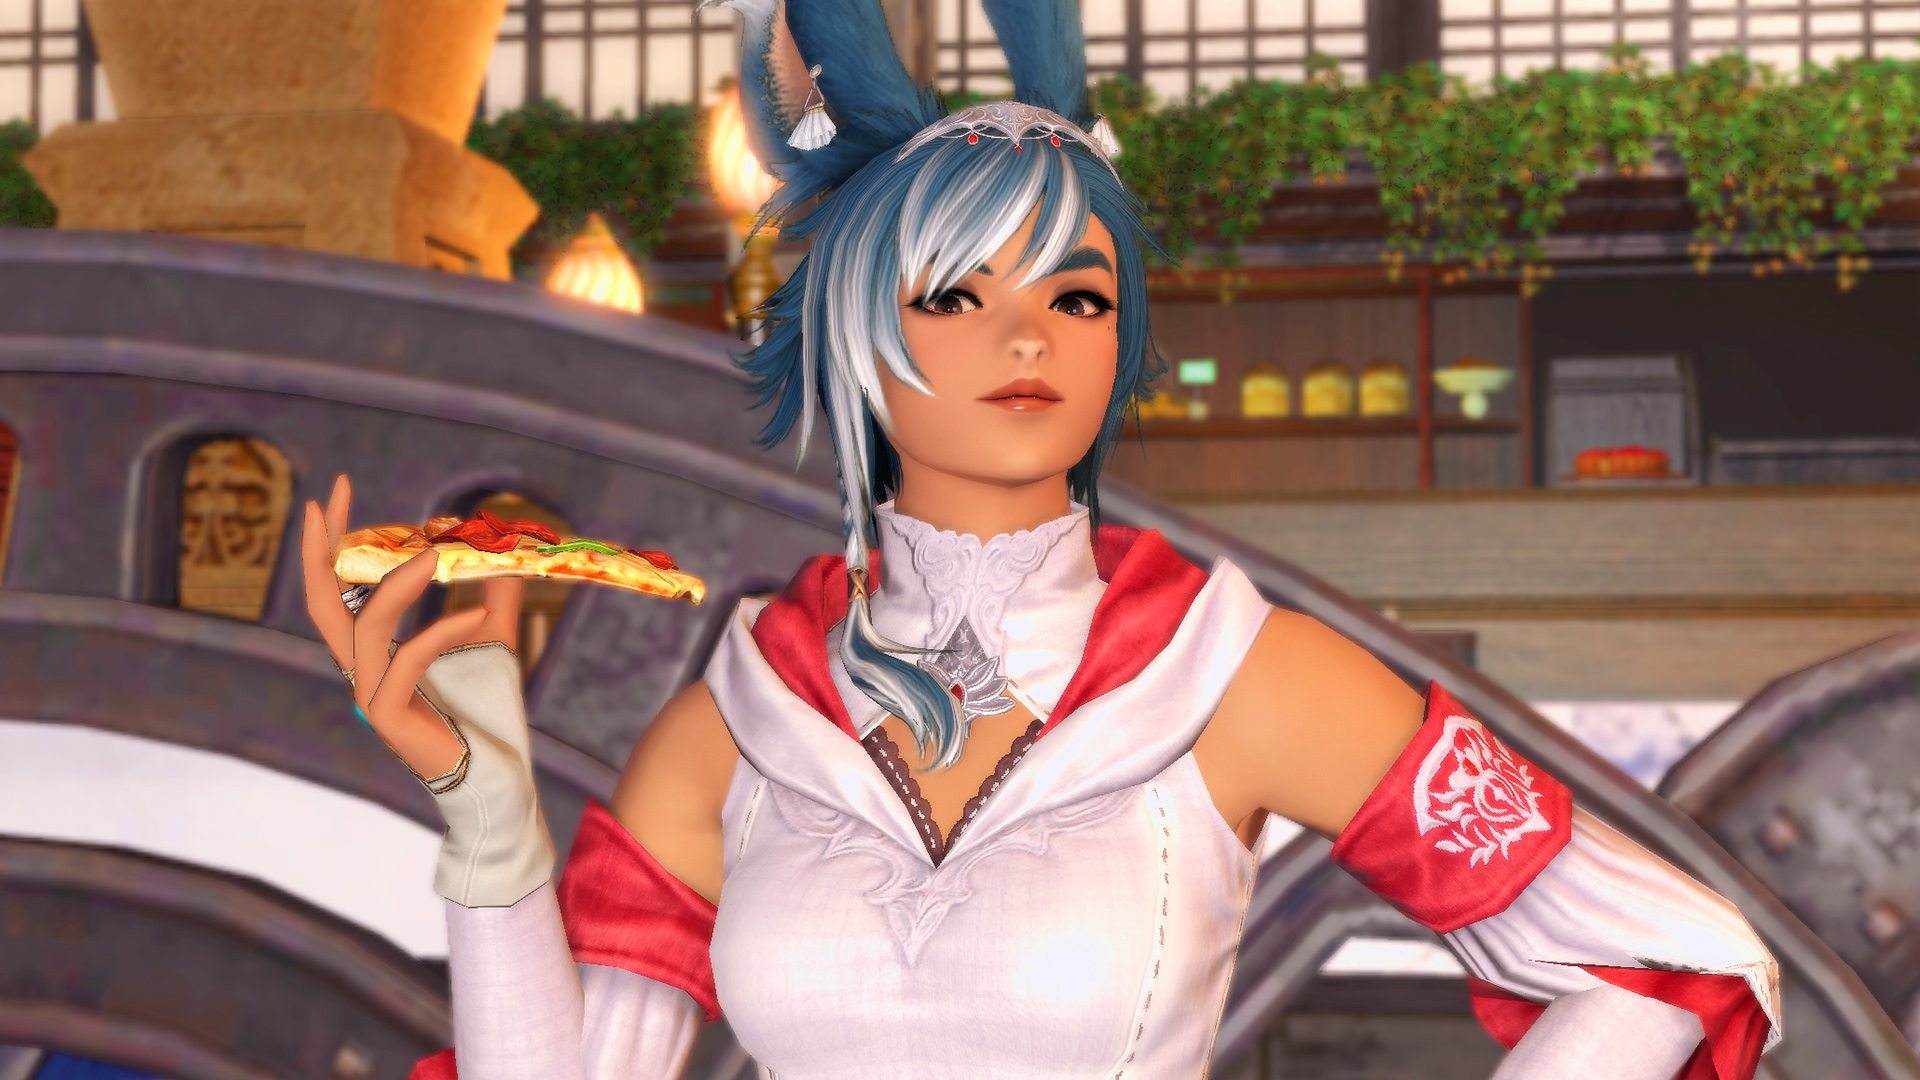 Viera eating pizza